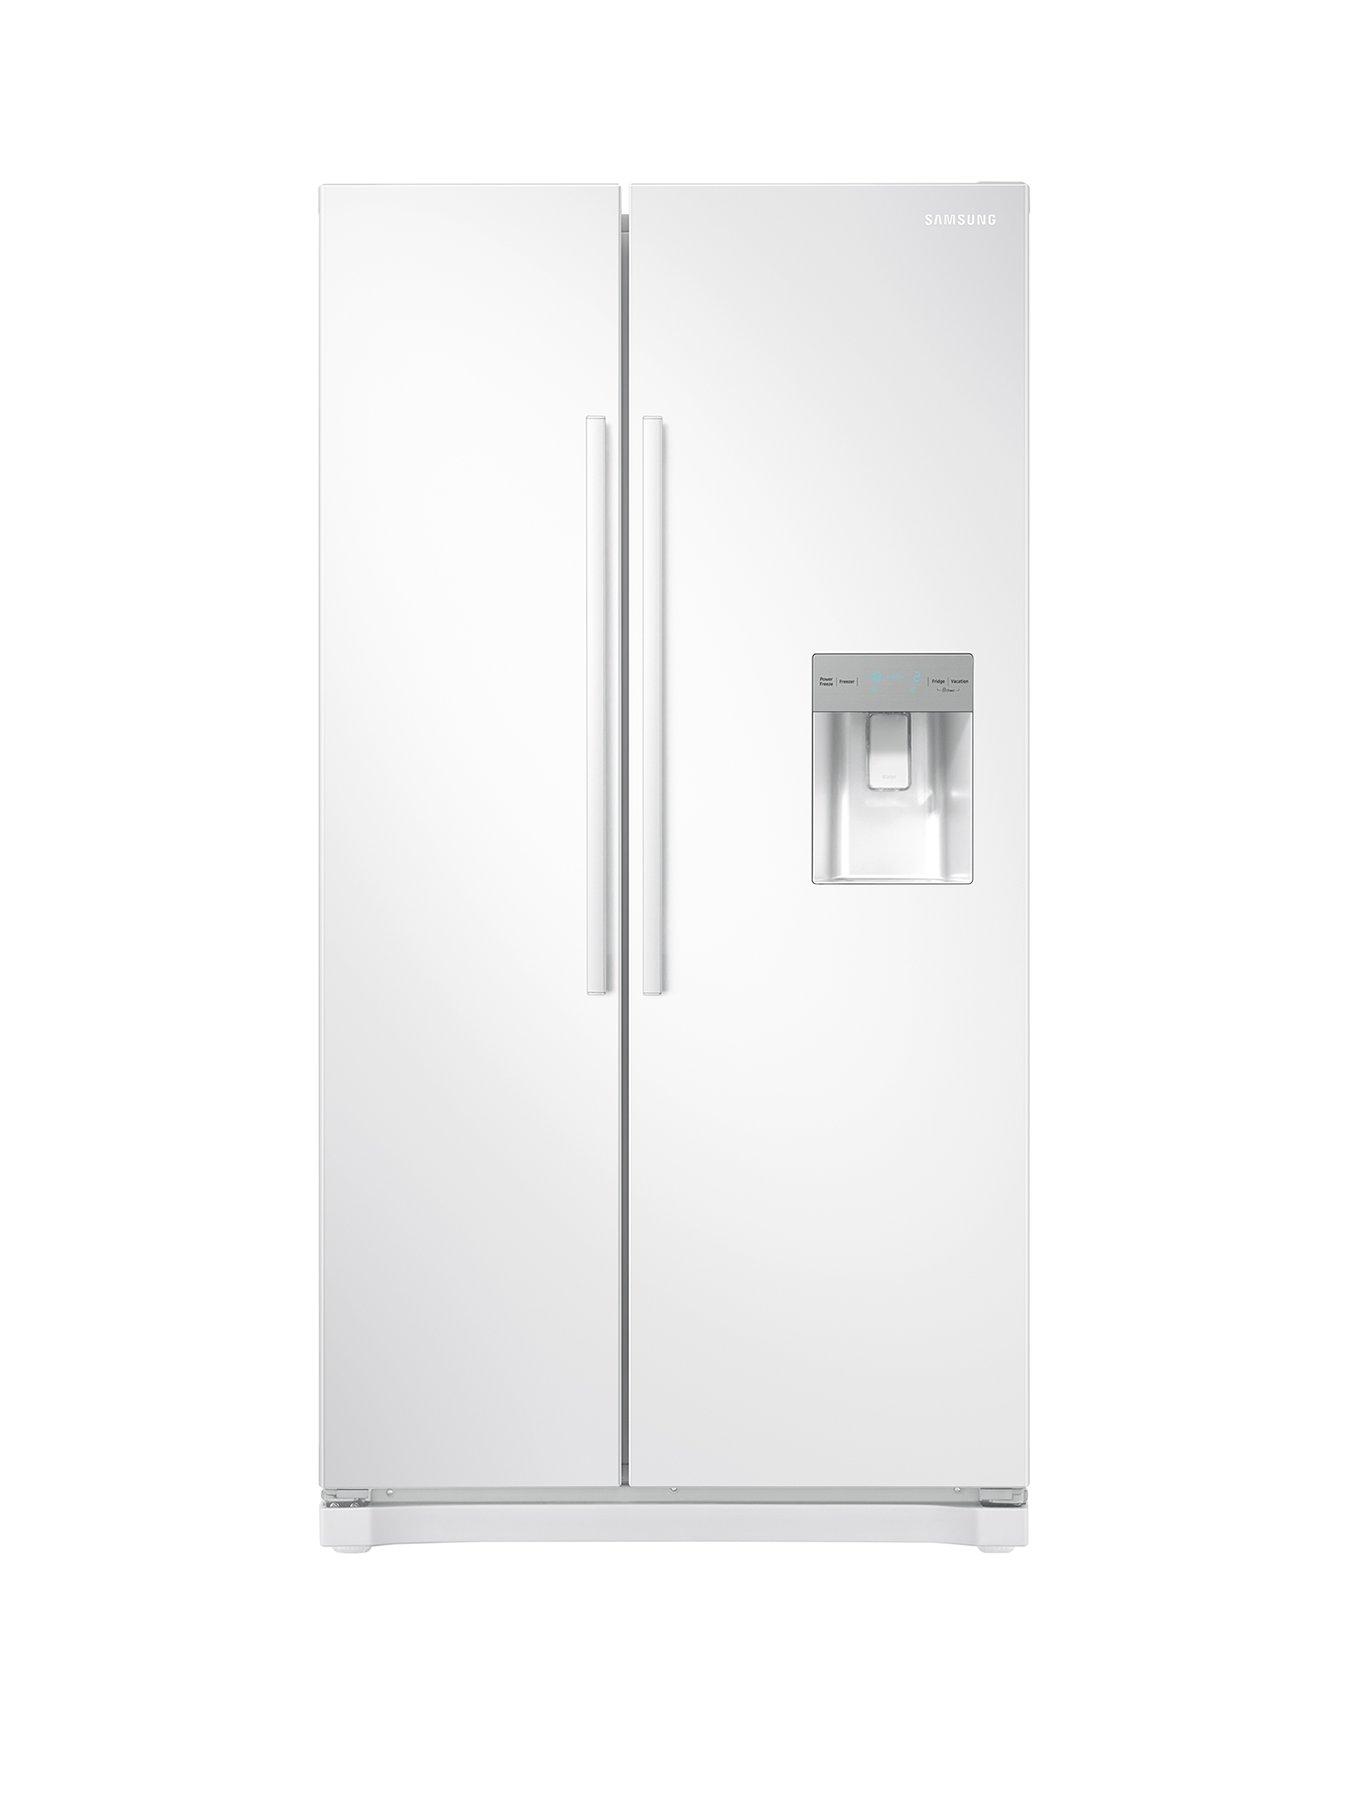 Samsung Rs52N3313Ww/Eu America Style Frost Free Fridge Freezer With Non Plumbed Water Dispenser And 5 Year Samsung Parts And Labour Warranty – White